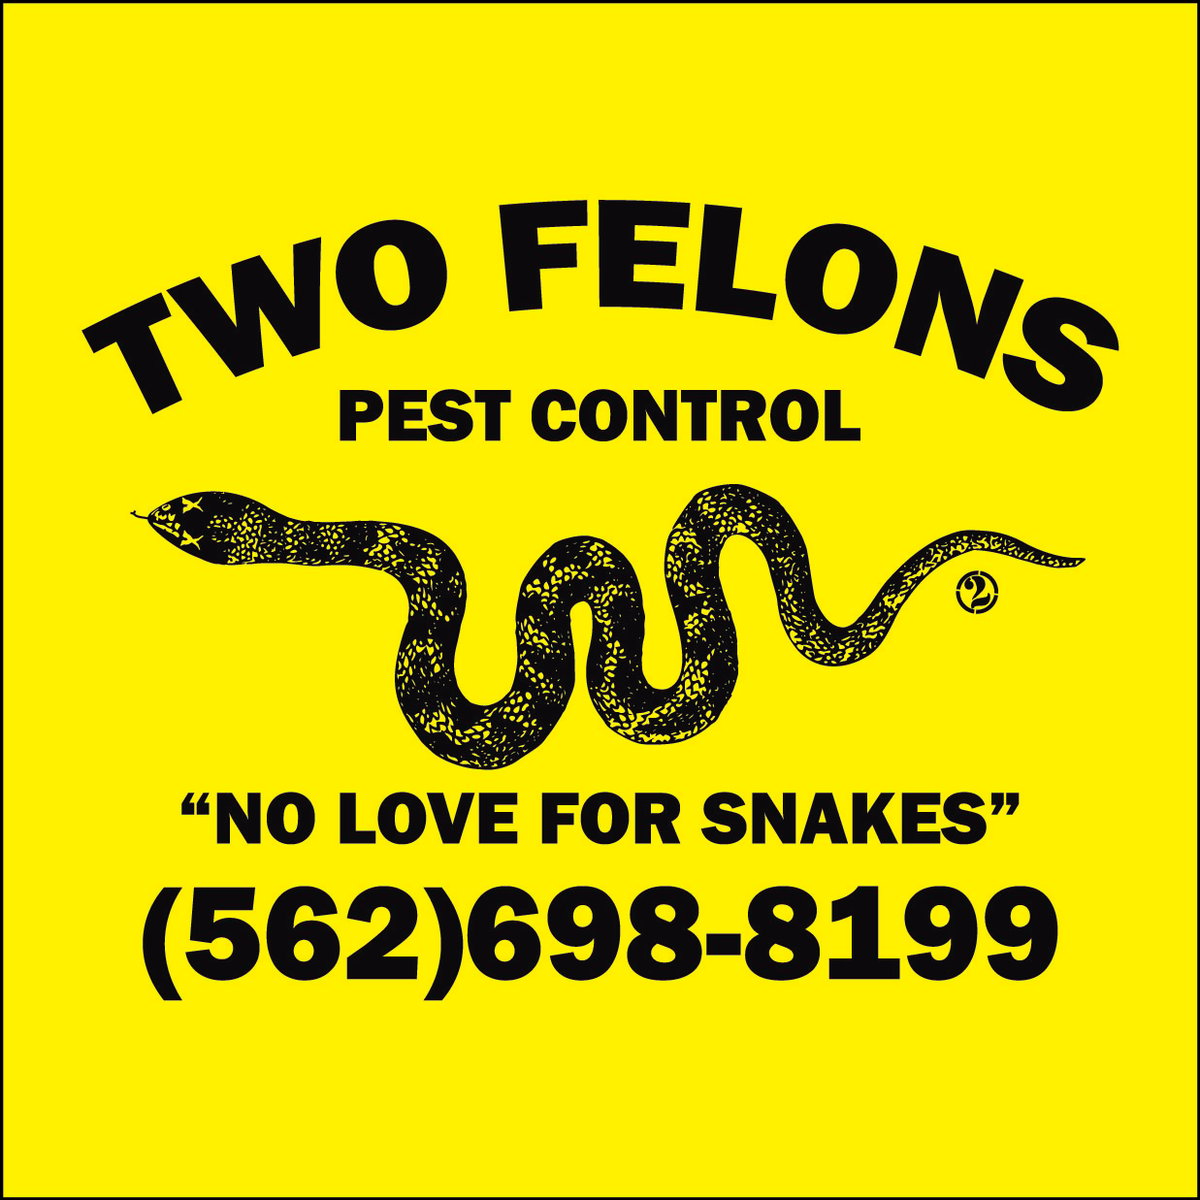 Two Felons Pest Control "SNAKES" Yellow